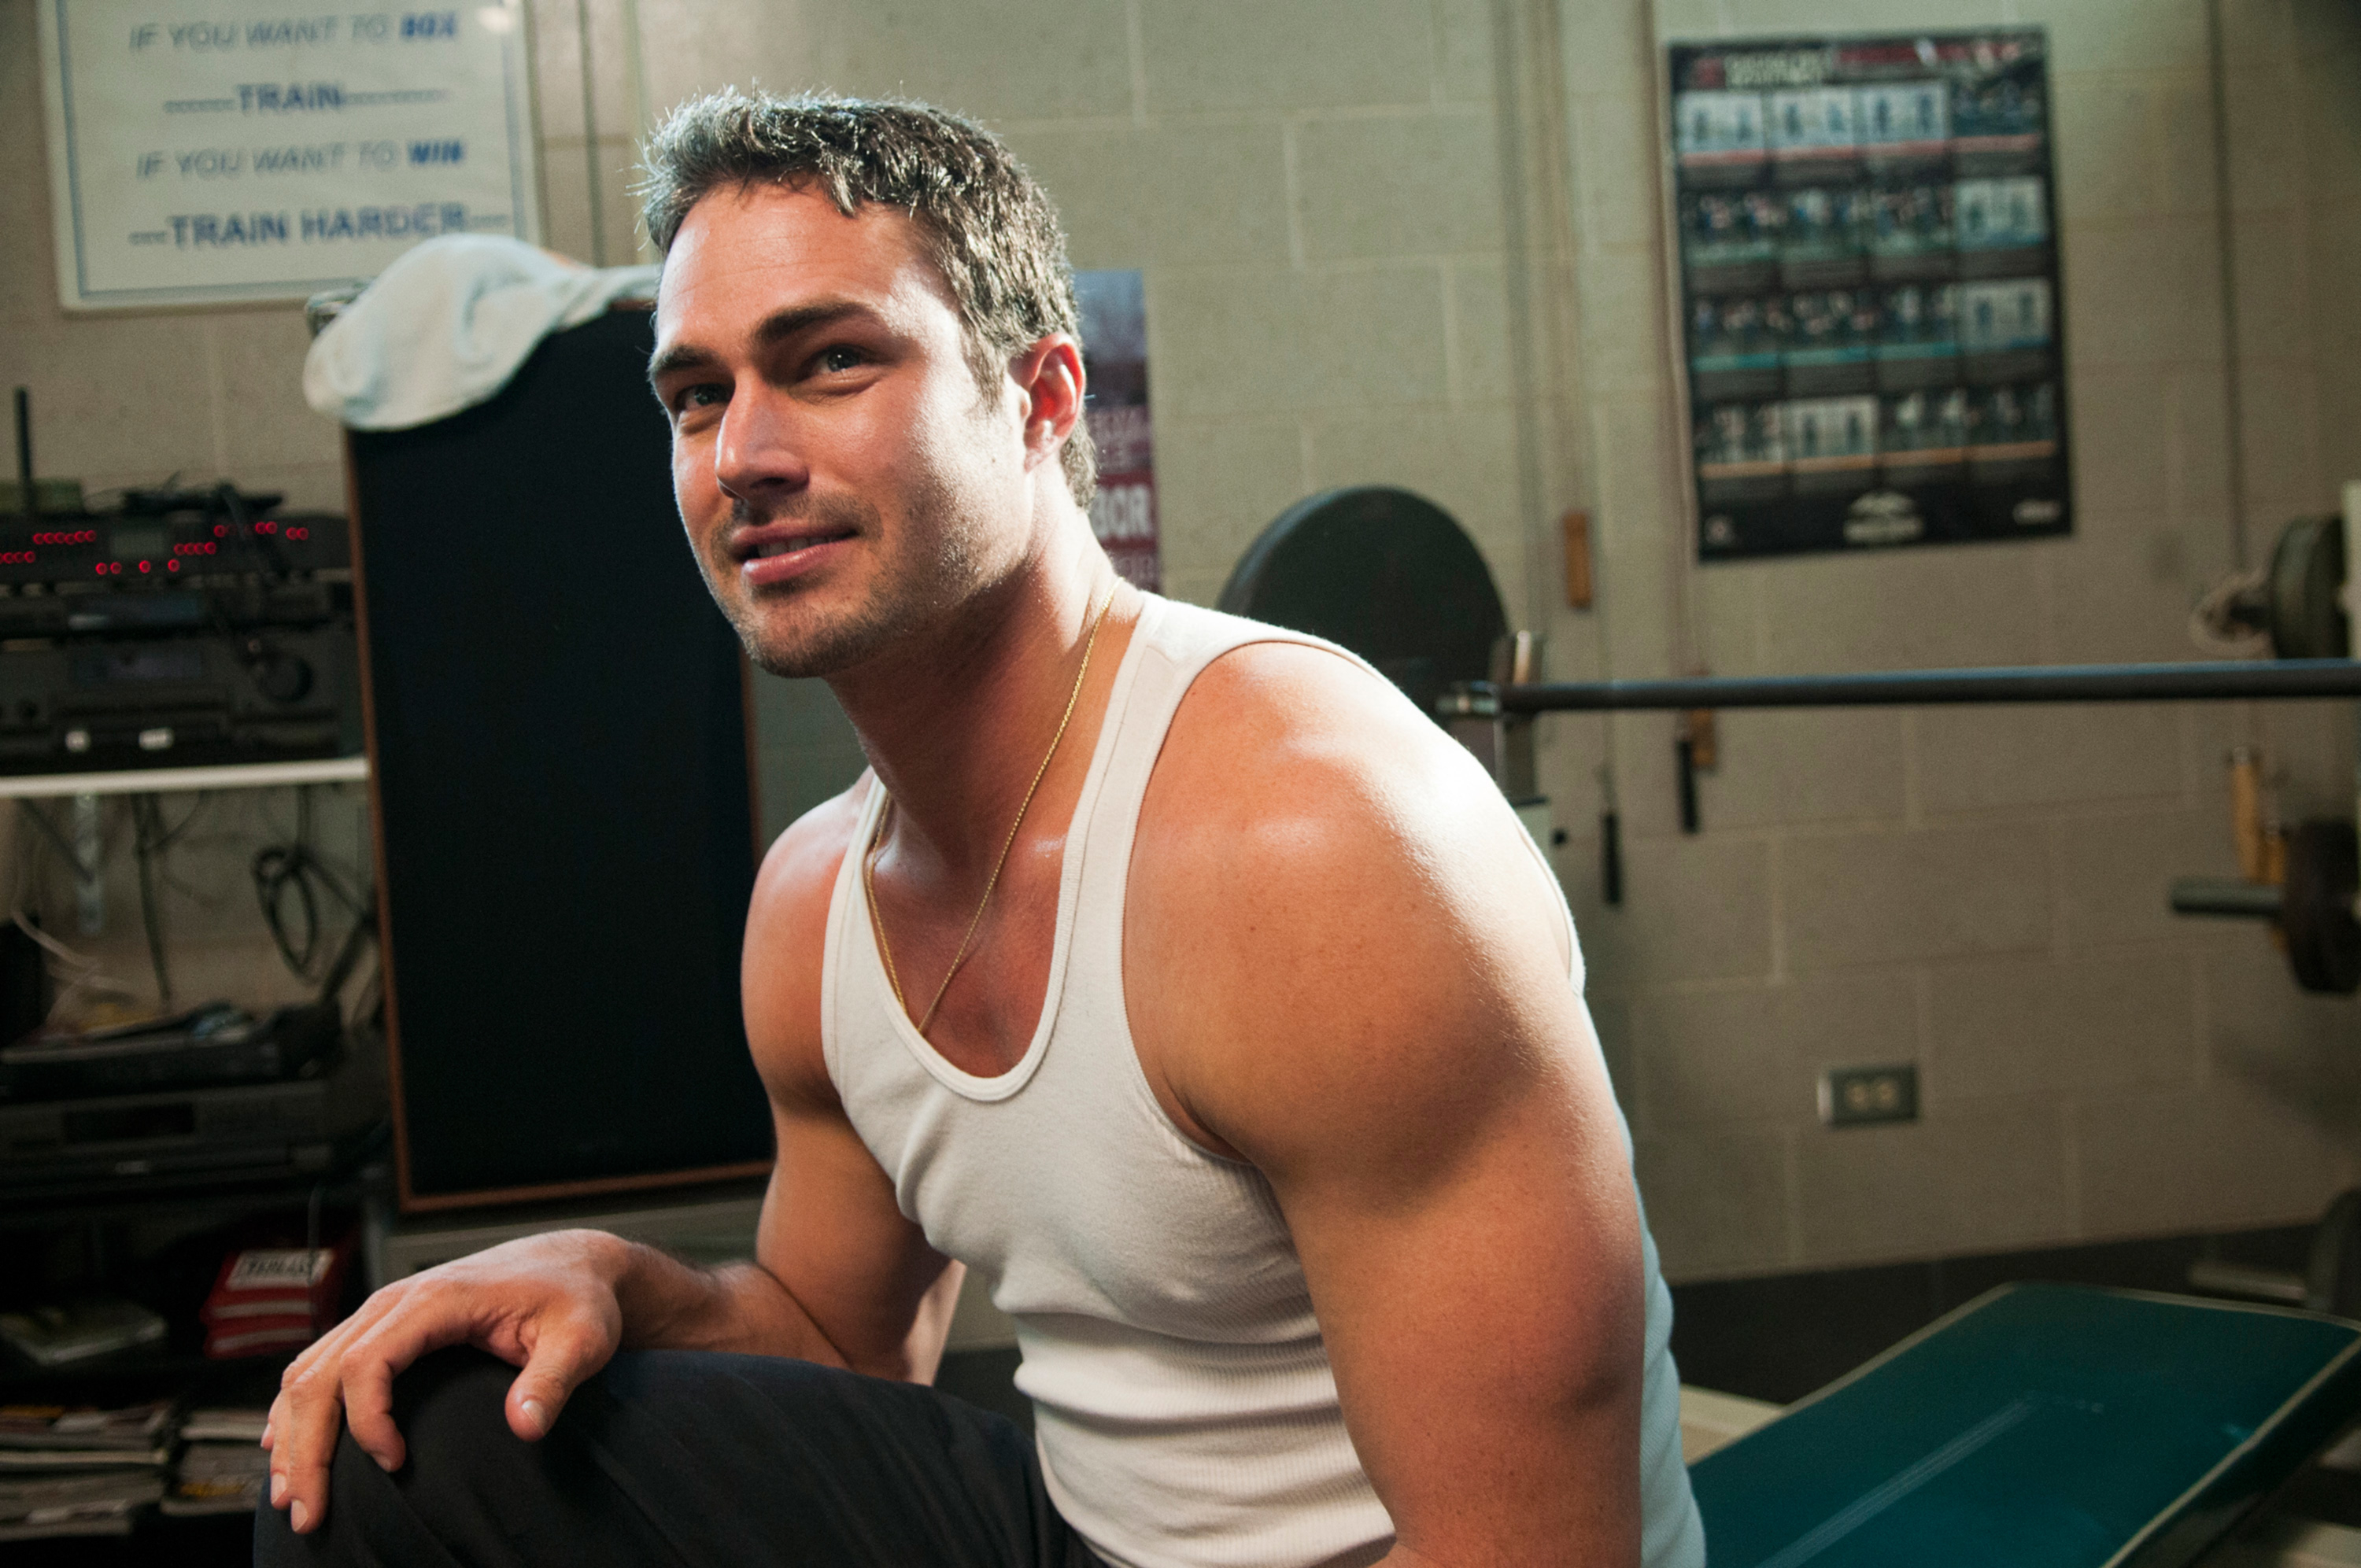 Man in a white tank top sitting in a gym, looking at the camera